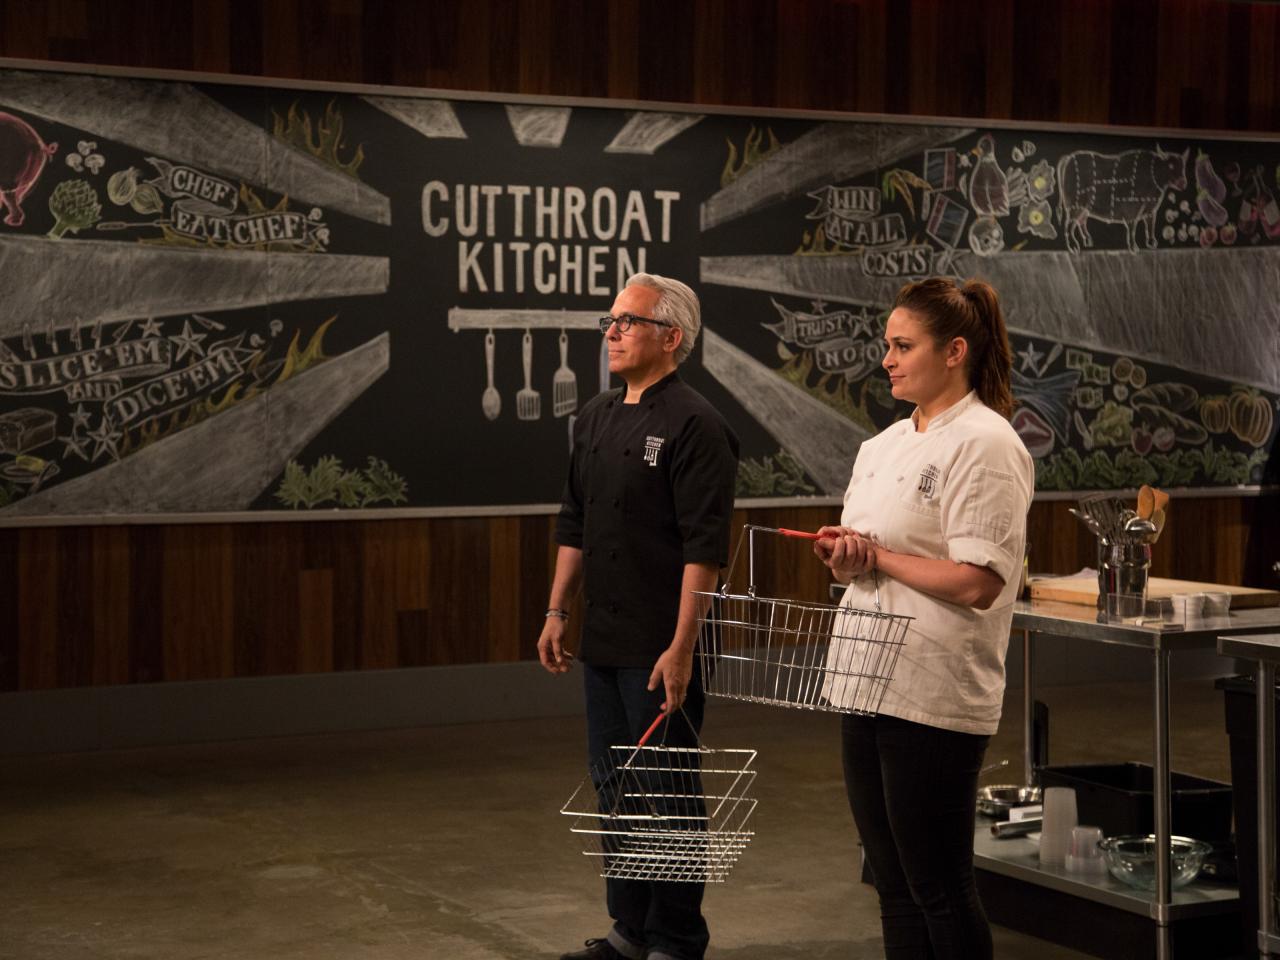 One On One With The Heat 1 Winner Of Cutthroat Kitchen Superstar